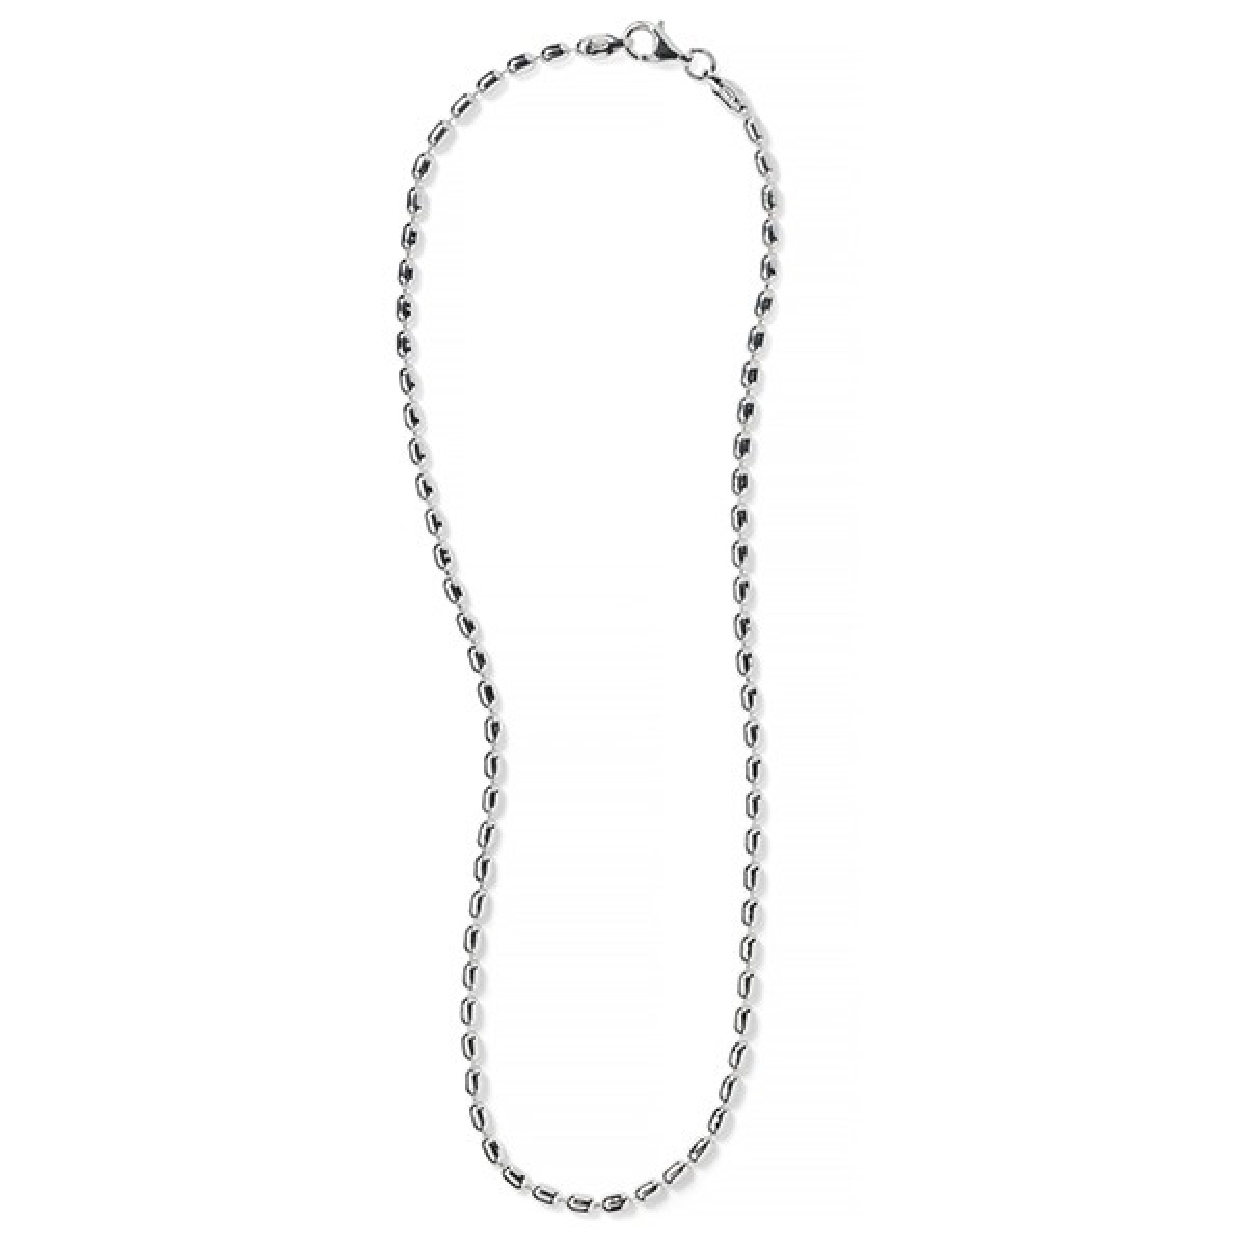 Southern Gates Sterling Silver 3mm Rice Bead Chain

30 Inches
